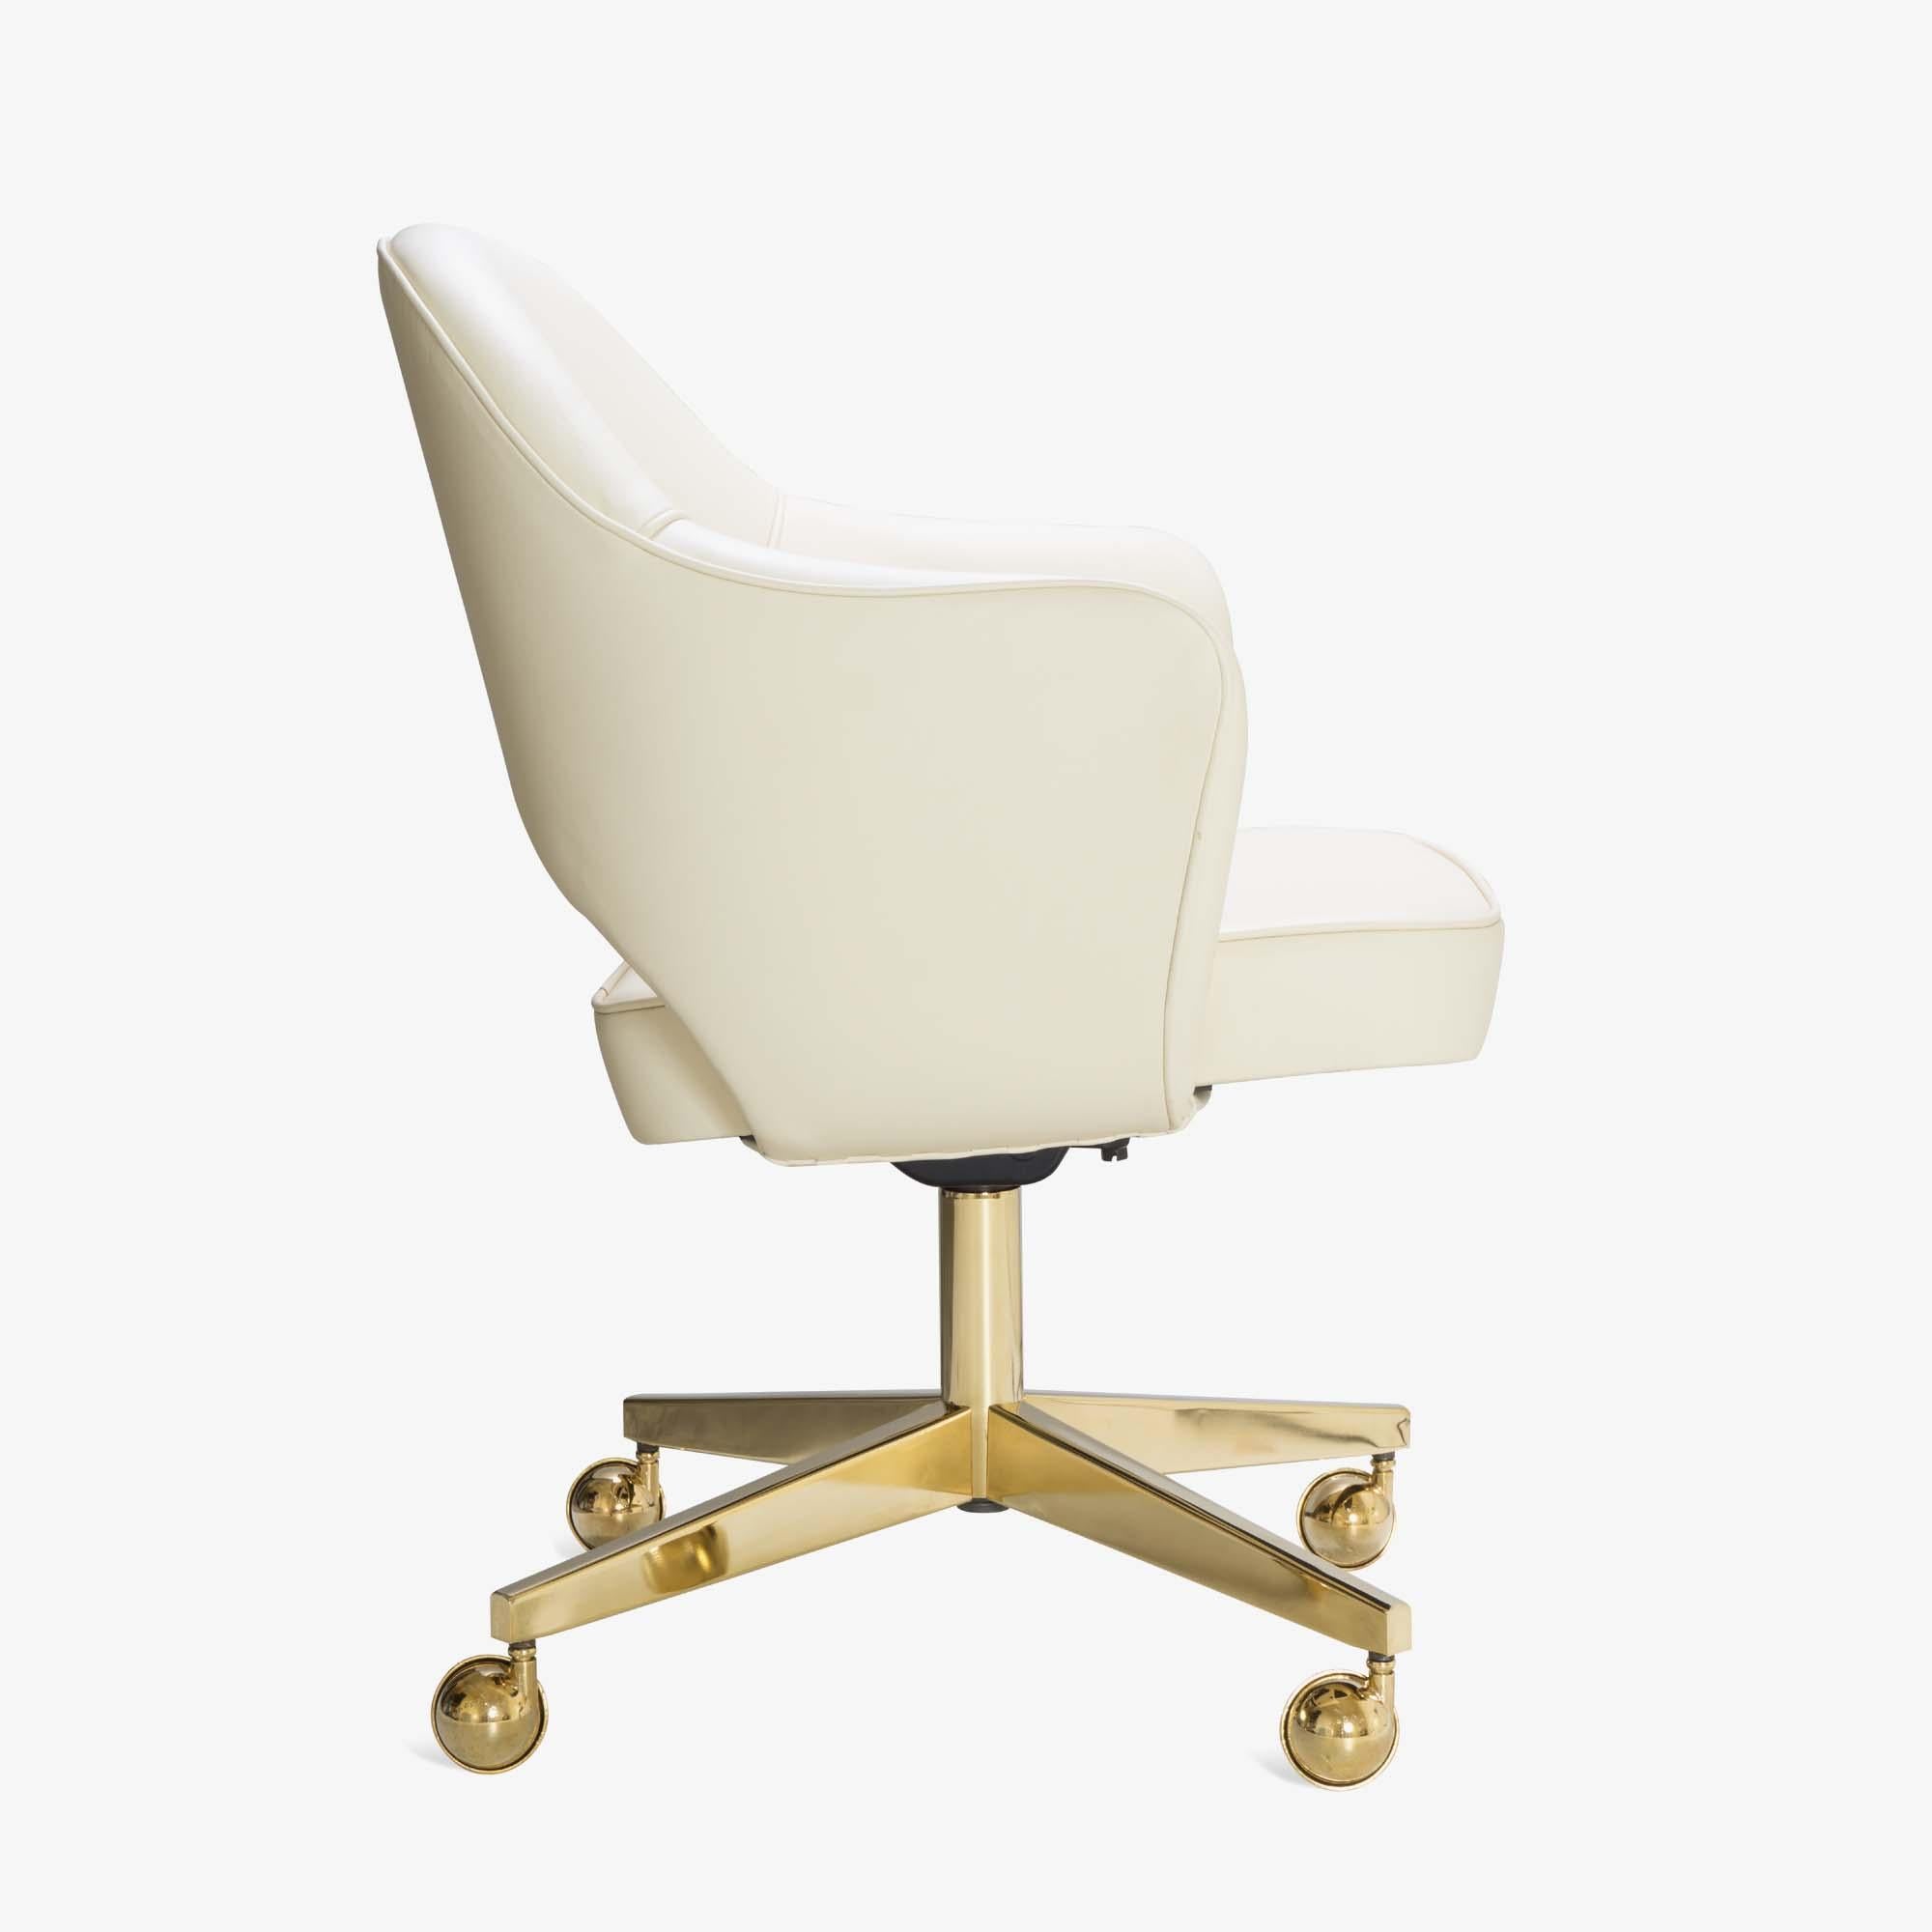 American Saarinen Executive Armchair in Creme Leather on Swivel Base, Gold Edition